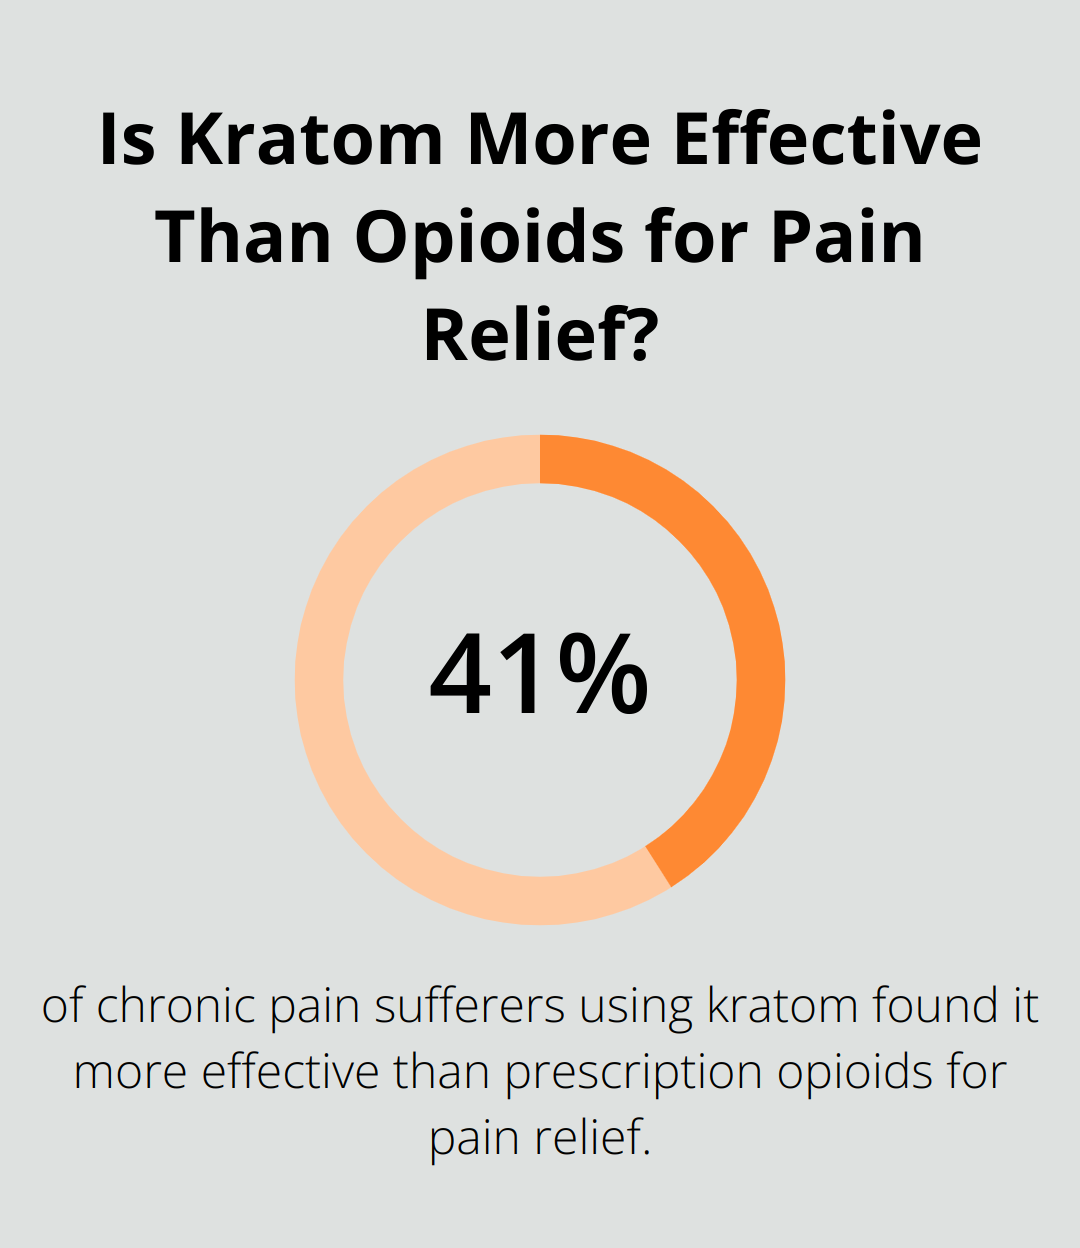 Is Kratom More Effective Than Opioids for Pain Relief?